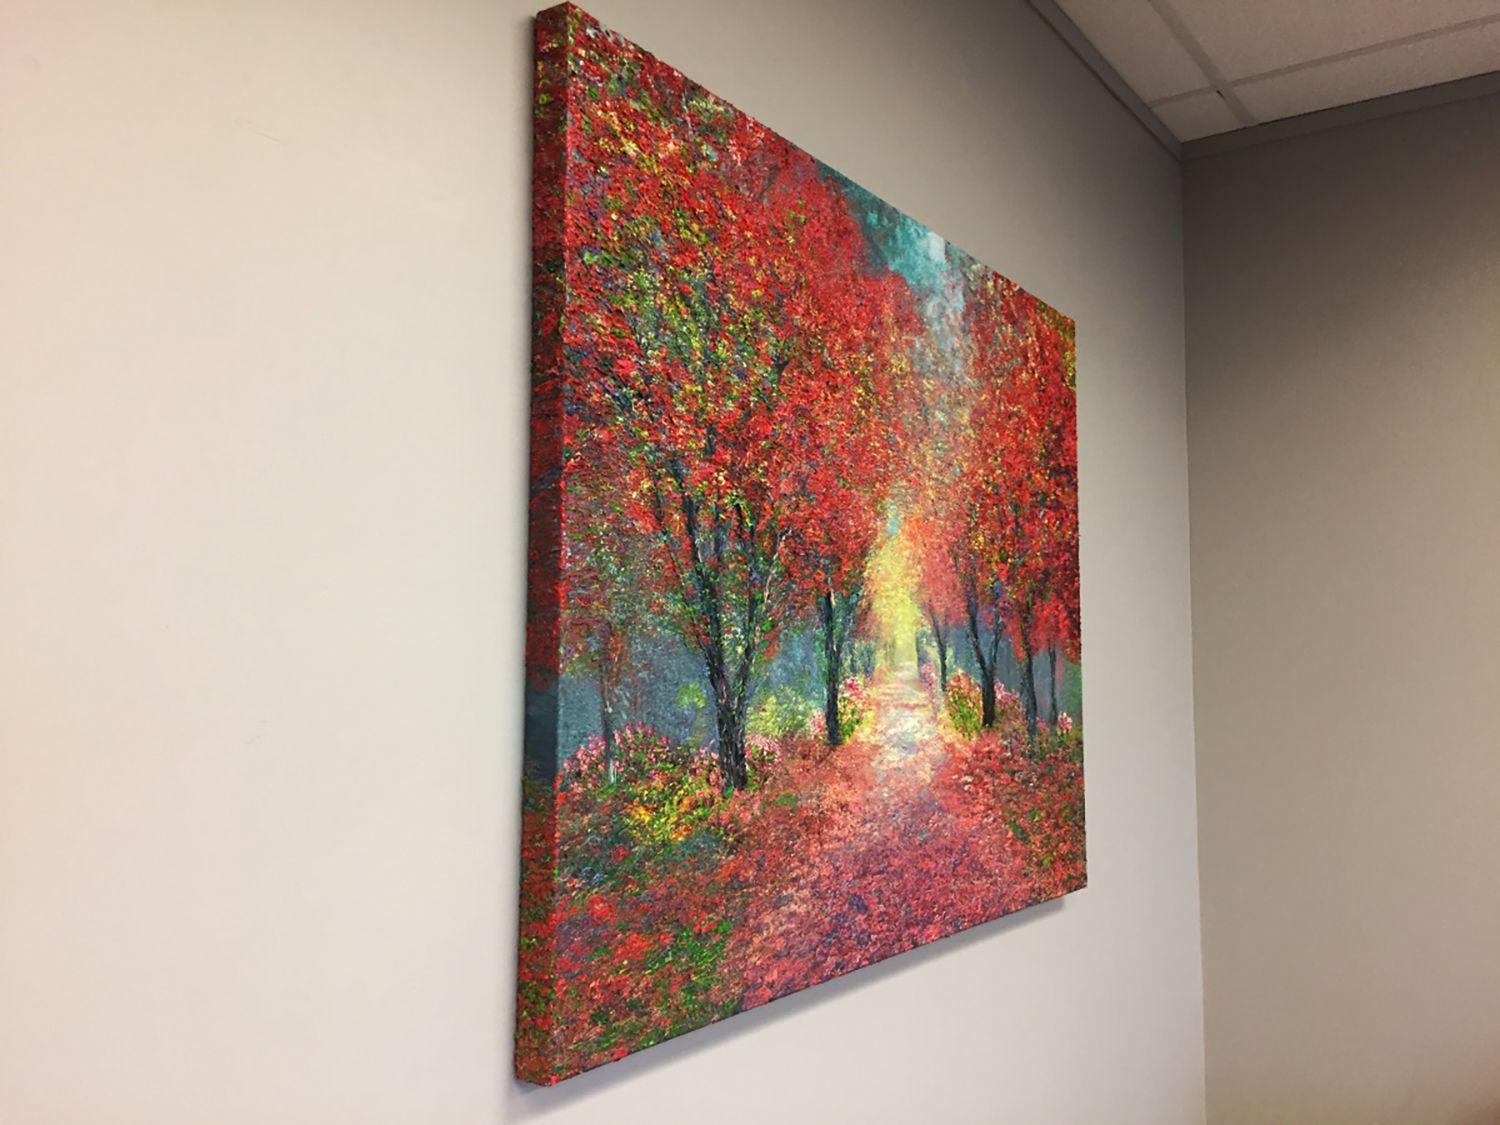 â€œI just loved painting this! In many ways, Fall is my favorite season. You can see the change taking place as green turns to maroon, then to brown and everything in between.â€     Oil on canvas study of tree-lined trail utilizing a variety of